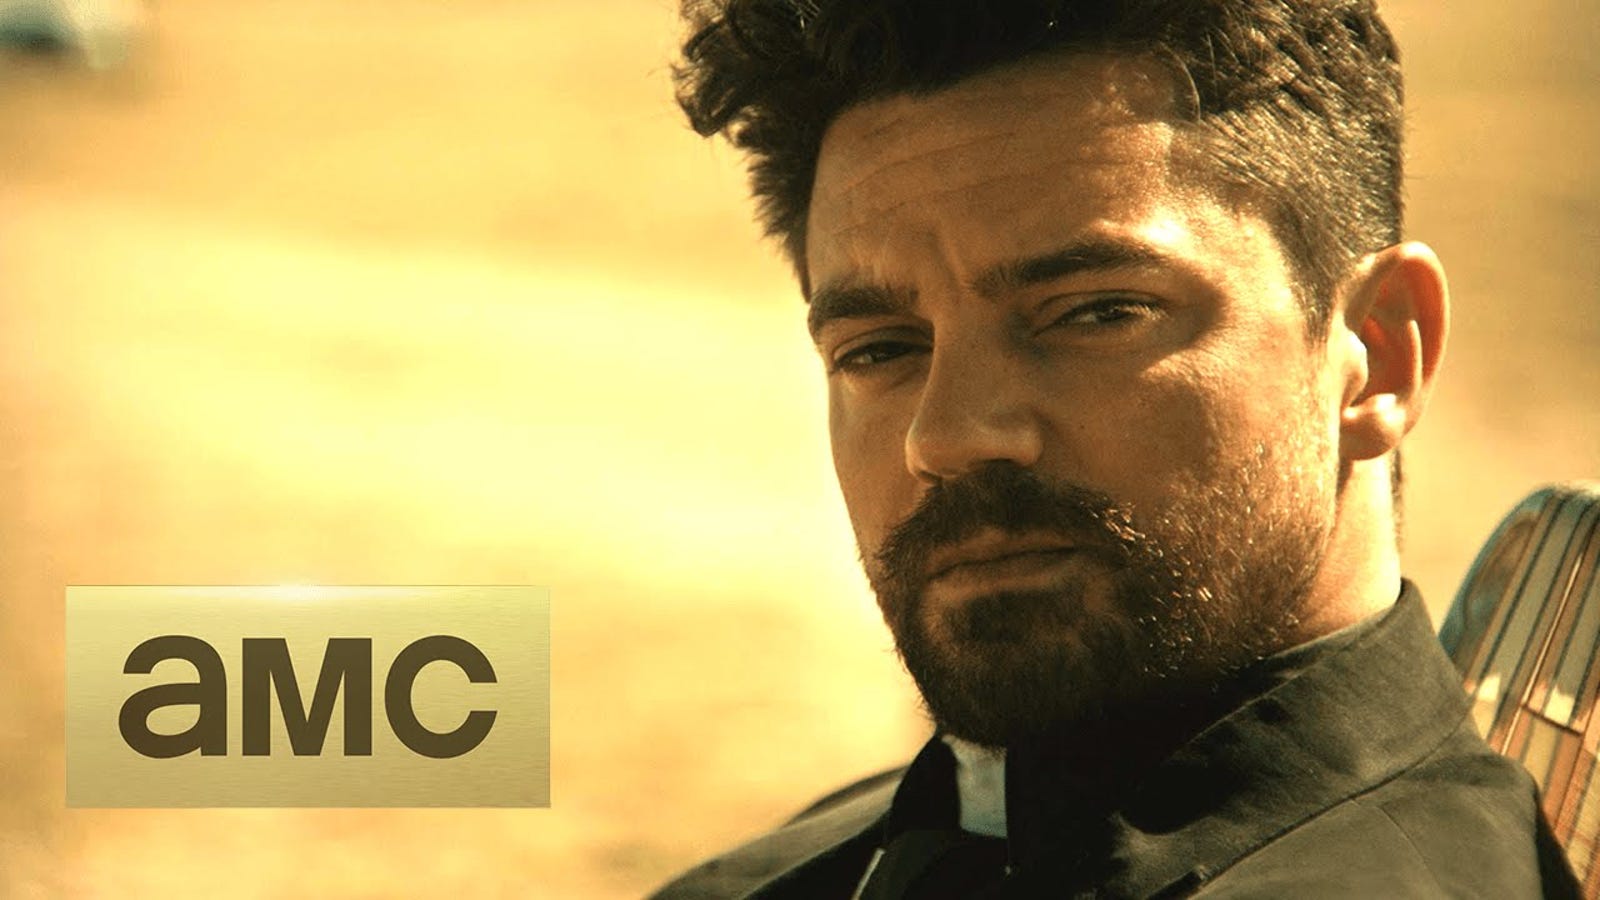 The First Trailer For Preacher is Here And It's Intense